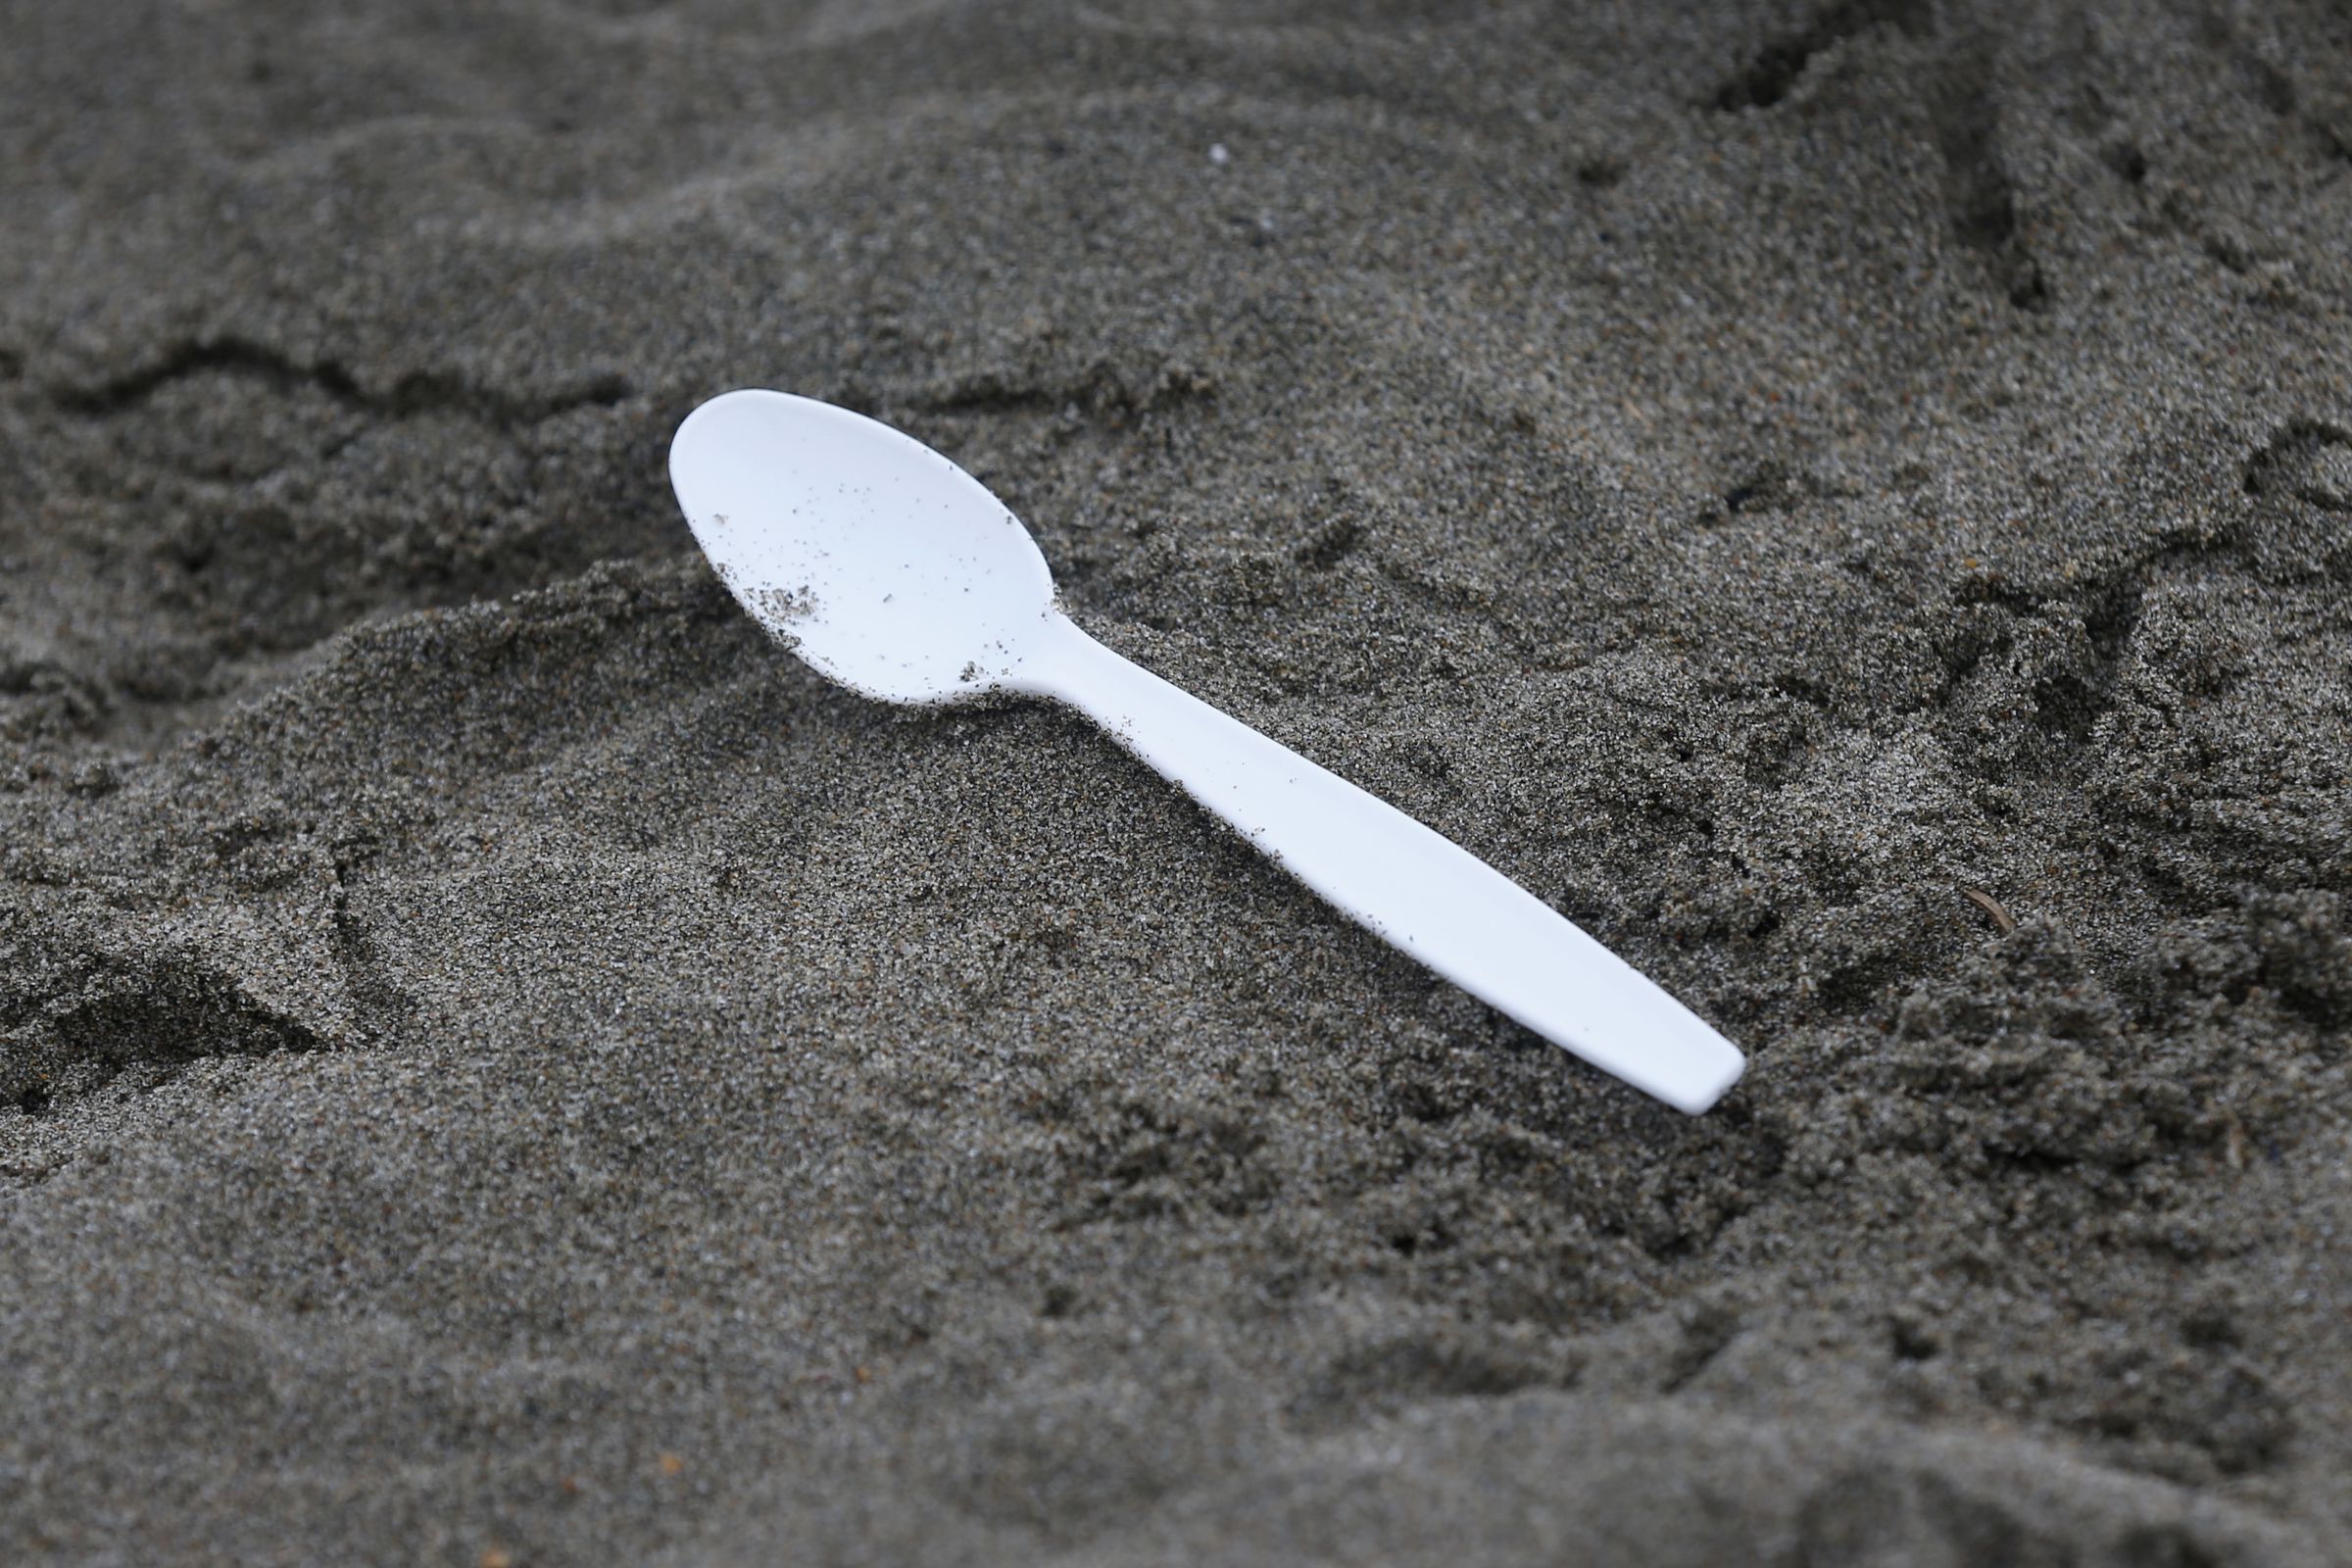 An image showing a plastic spoon littered on the beach